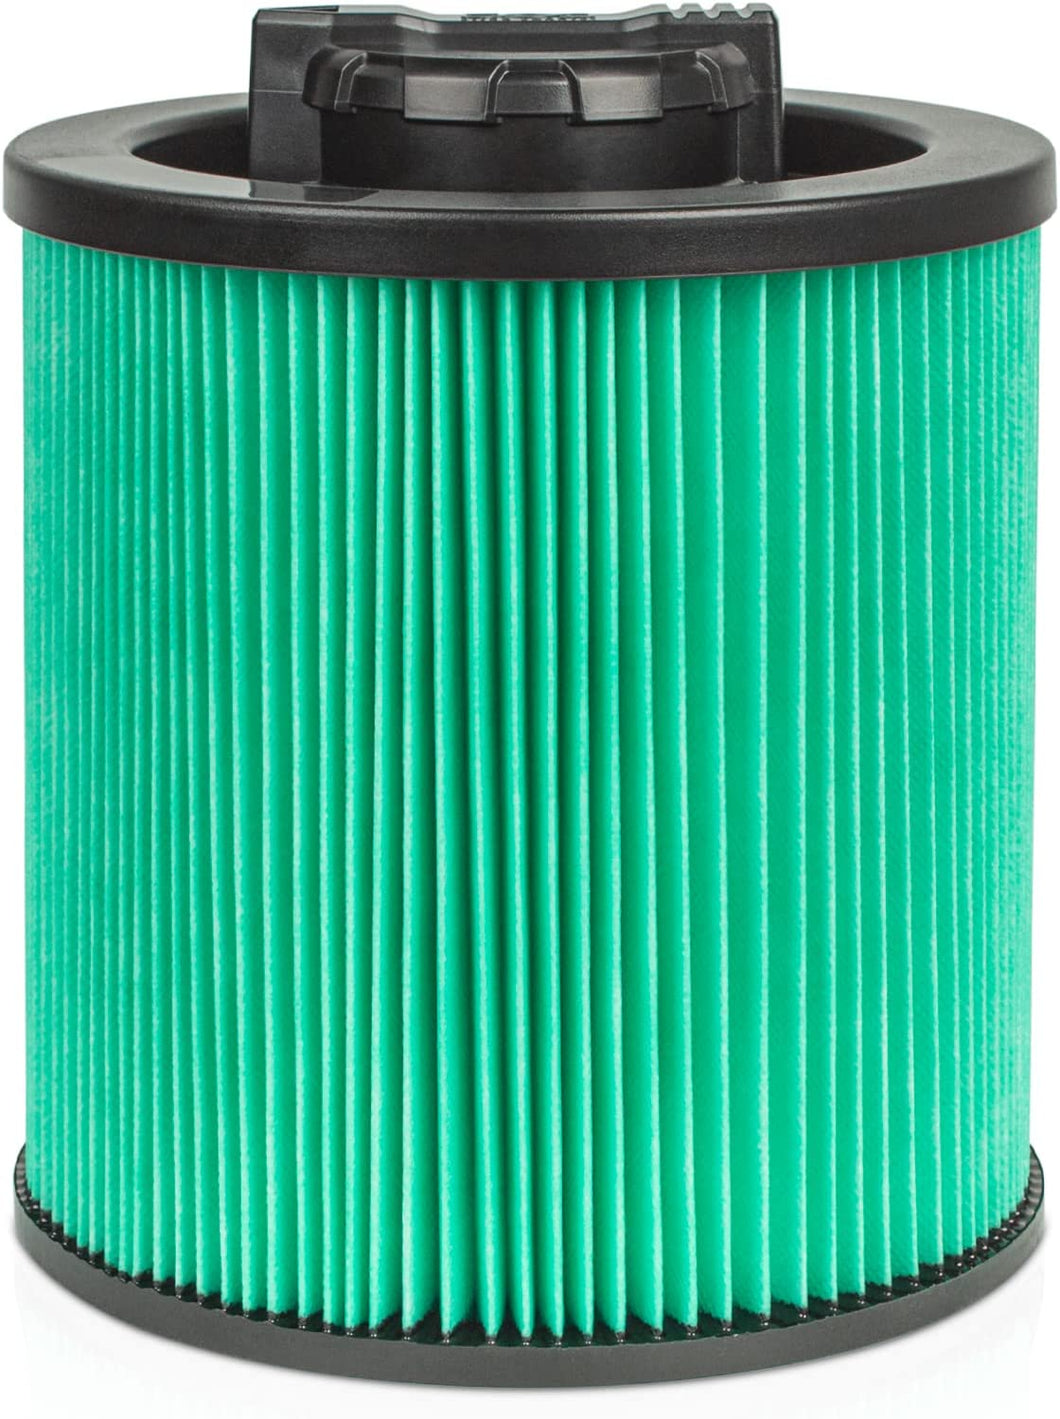 Replacement DXVC6914 HEPA High Efficiency Filter Fit for Regular 6-16 Gallon Wet/Dry Vacuums. Compatible with Dewalt DXV06P DXV09P DXV09PA DXV10P DXV10PL DXV10S DXV10SA DXV10SB DXV12P DXV14P DXV16P